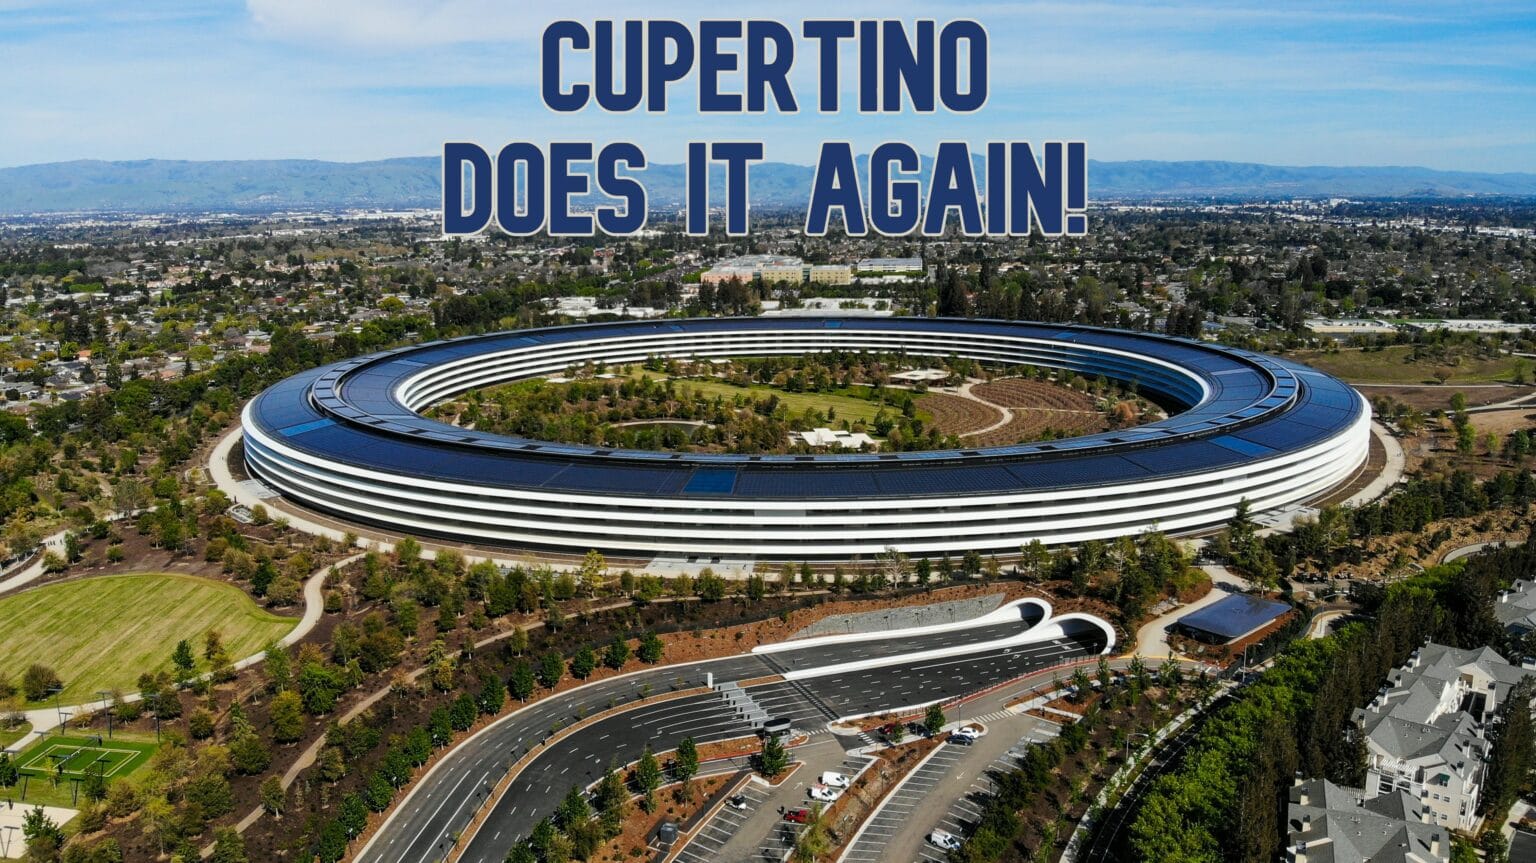 Apple earnings Q3 2022: Cupertino does it again! Against all odds, Apple squeaks out another record-breaking quarter.